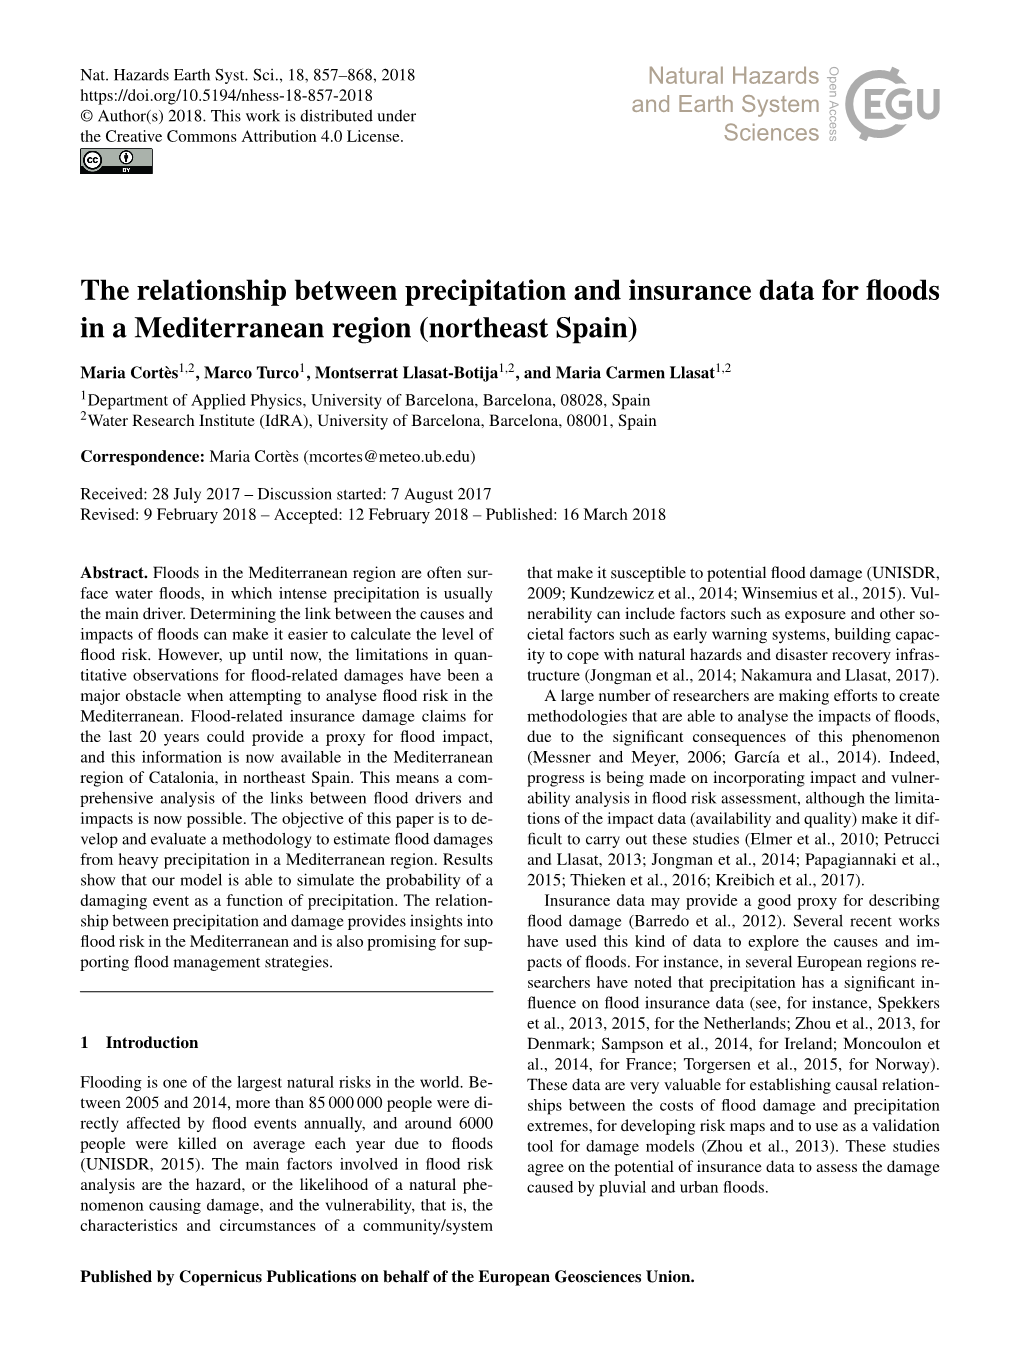 The Relationship Between Precipitation and Insurance Data for ﬂoods in a Mediterranean Region (Northeast Spain)